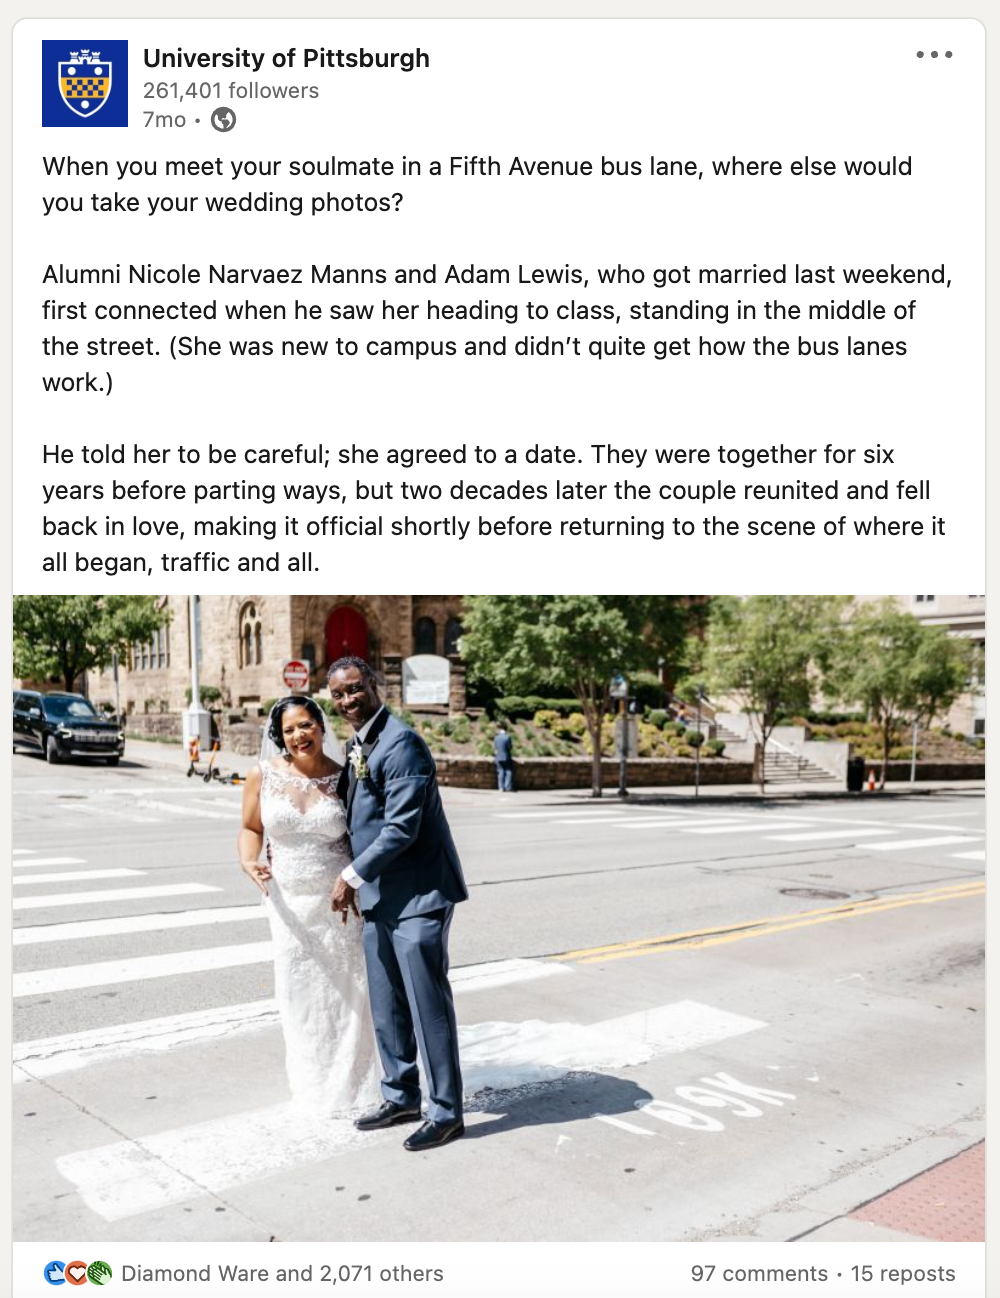 A Linkedin post from the University of Pittsburgh shows a couple's wedding picture. The text reads When you meet your soulmate in a Fifth Avenue bus lane, where else would you take your wedding photos?  Alumni Nicole Narvaez Manns and Adam Lewis, who got married last weekend, first connected when he saw her heading to class, standing in the middle of the street. (She was new to campus and didn’t quite get how the bus lanes work.)  He told her to be careful; she agreed to a date.